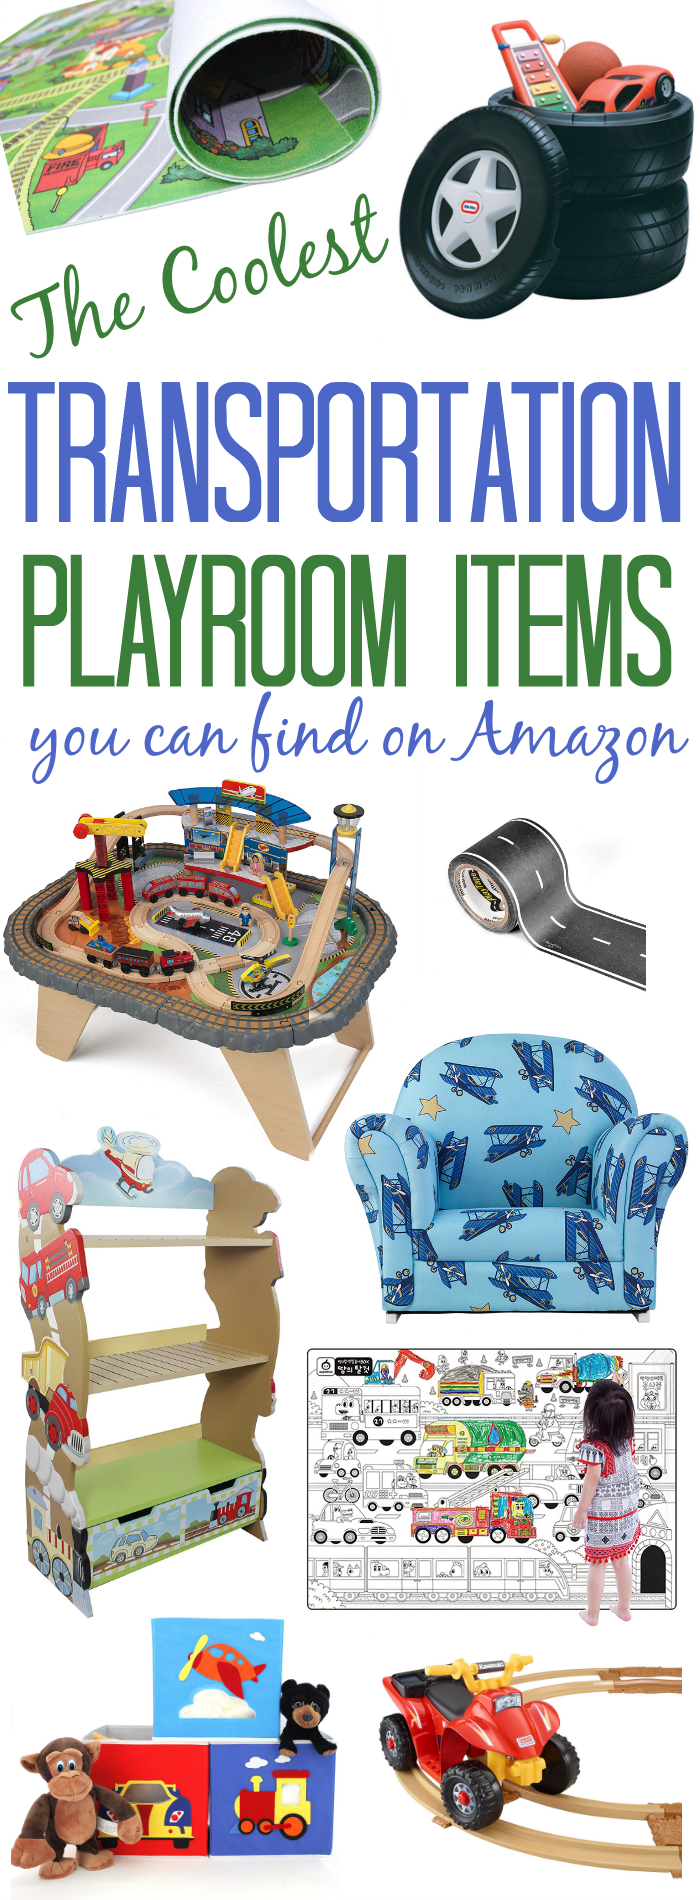 We found the coolest items for a Transportation Play room! And they're all available on Amazon! 